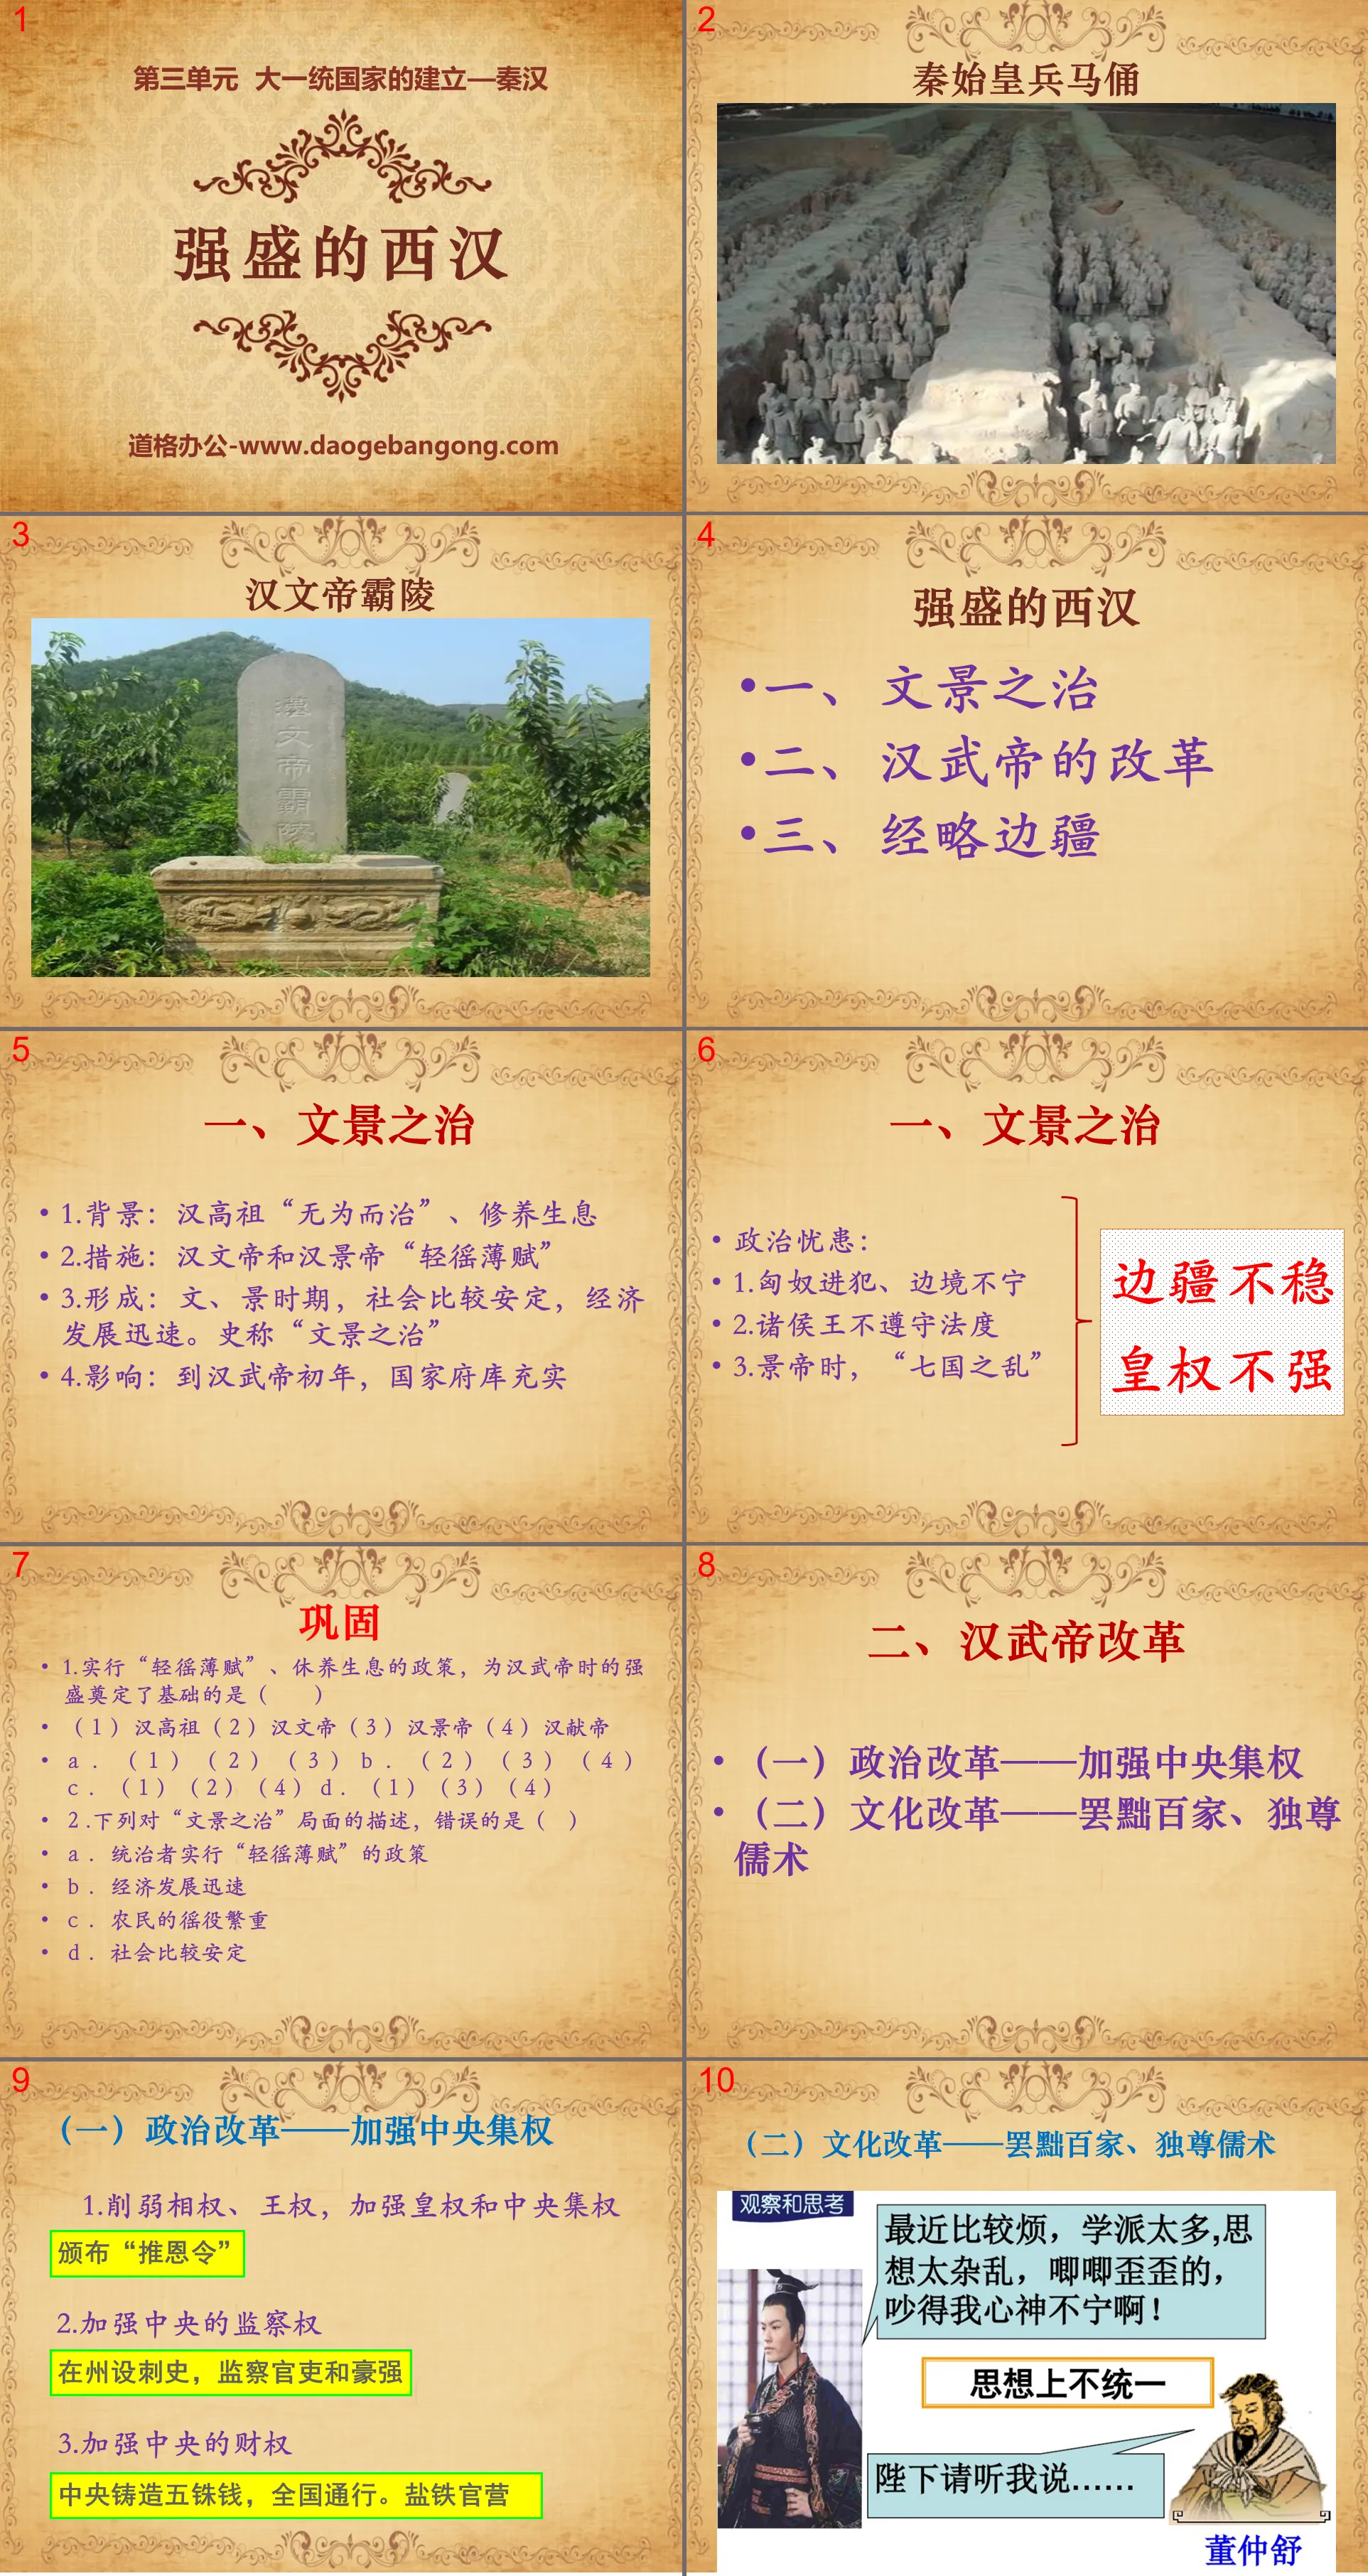 "The Powerful Western Han Dynasty" The establishment of a unified country - Qin and Han PPT courseware